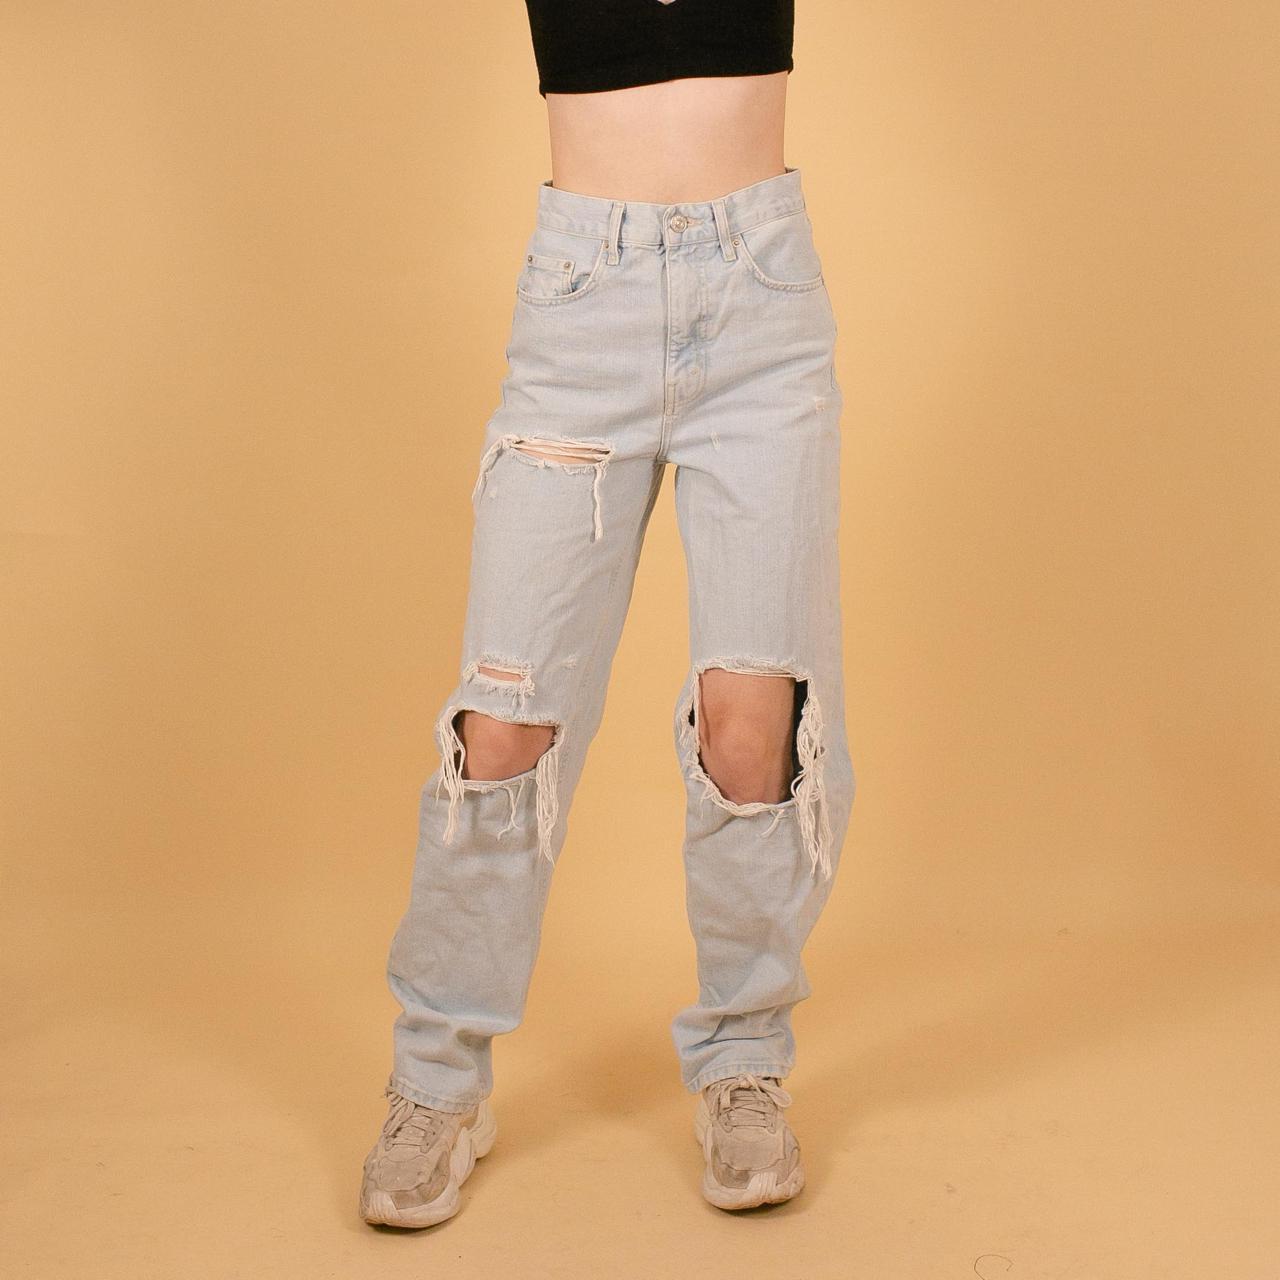 Urban Outfitters Bdg High Waisted Baggy Jean Depop 